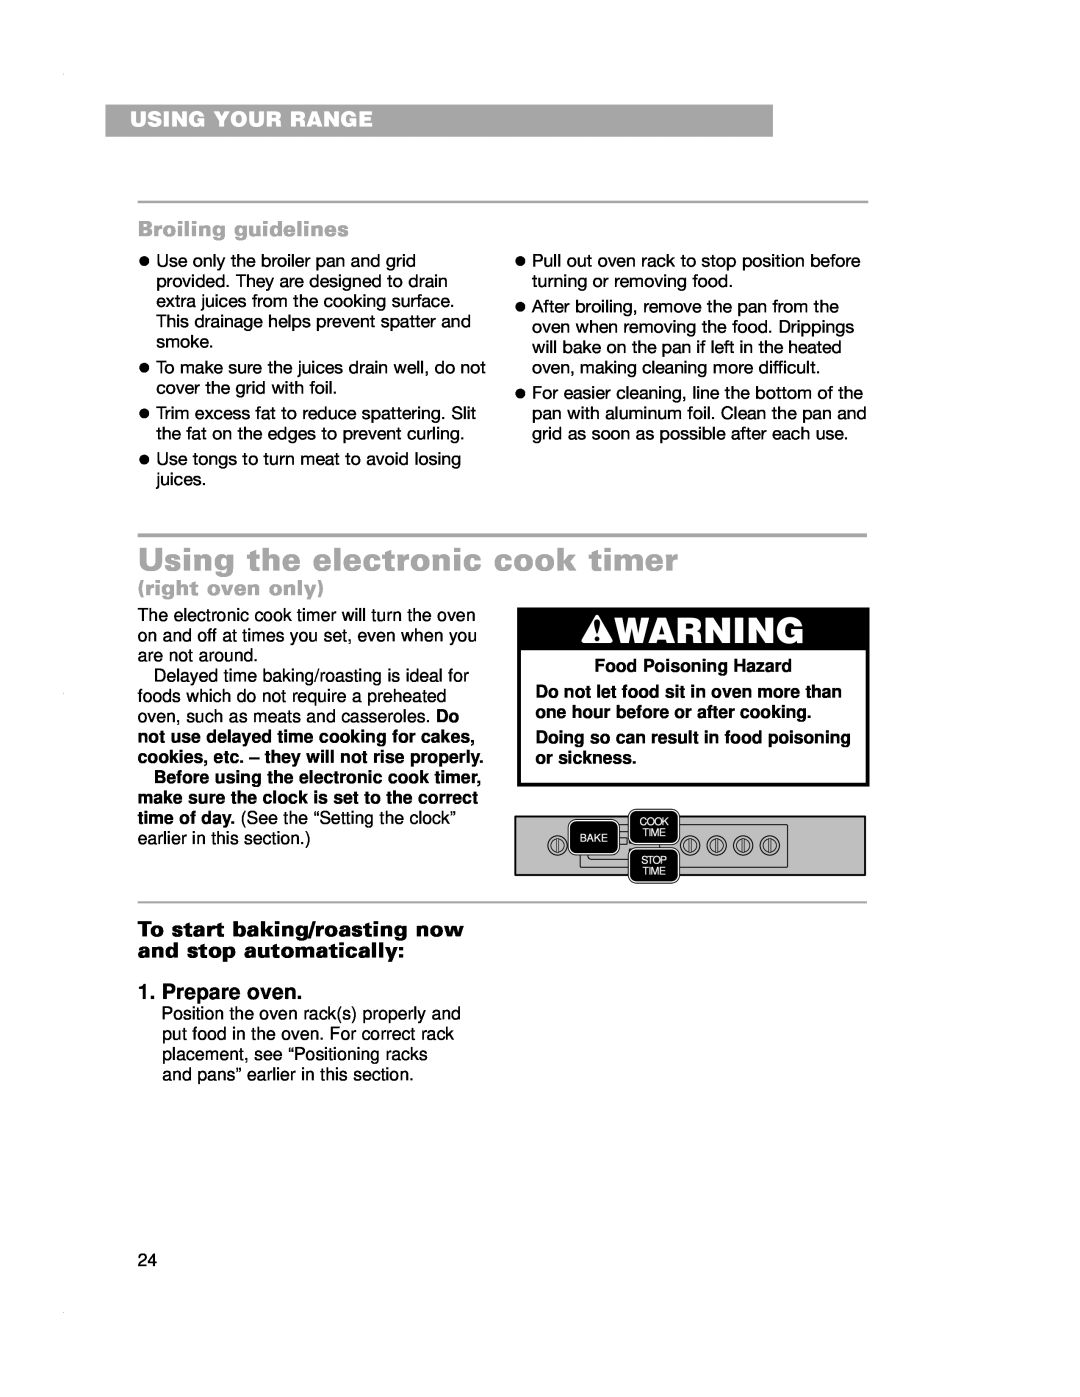 Whirlpool RF4700XE warranty Using the electronic cook timer, Broiling guidelines, Prepare oven, wWARNING, Using Your Range 